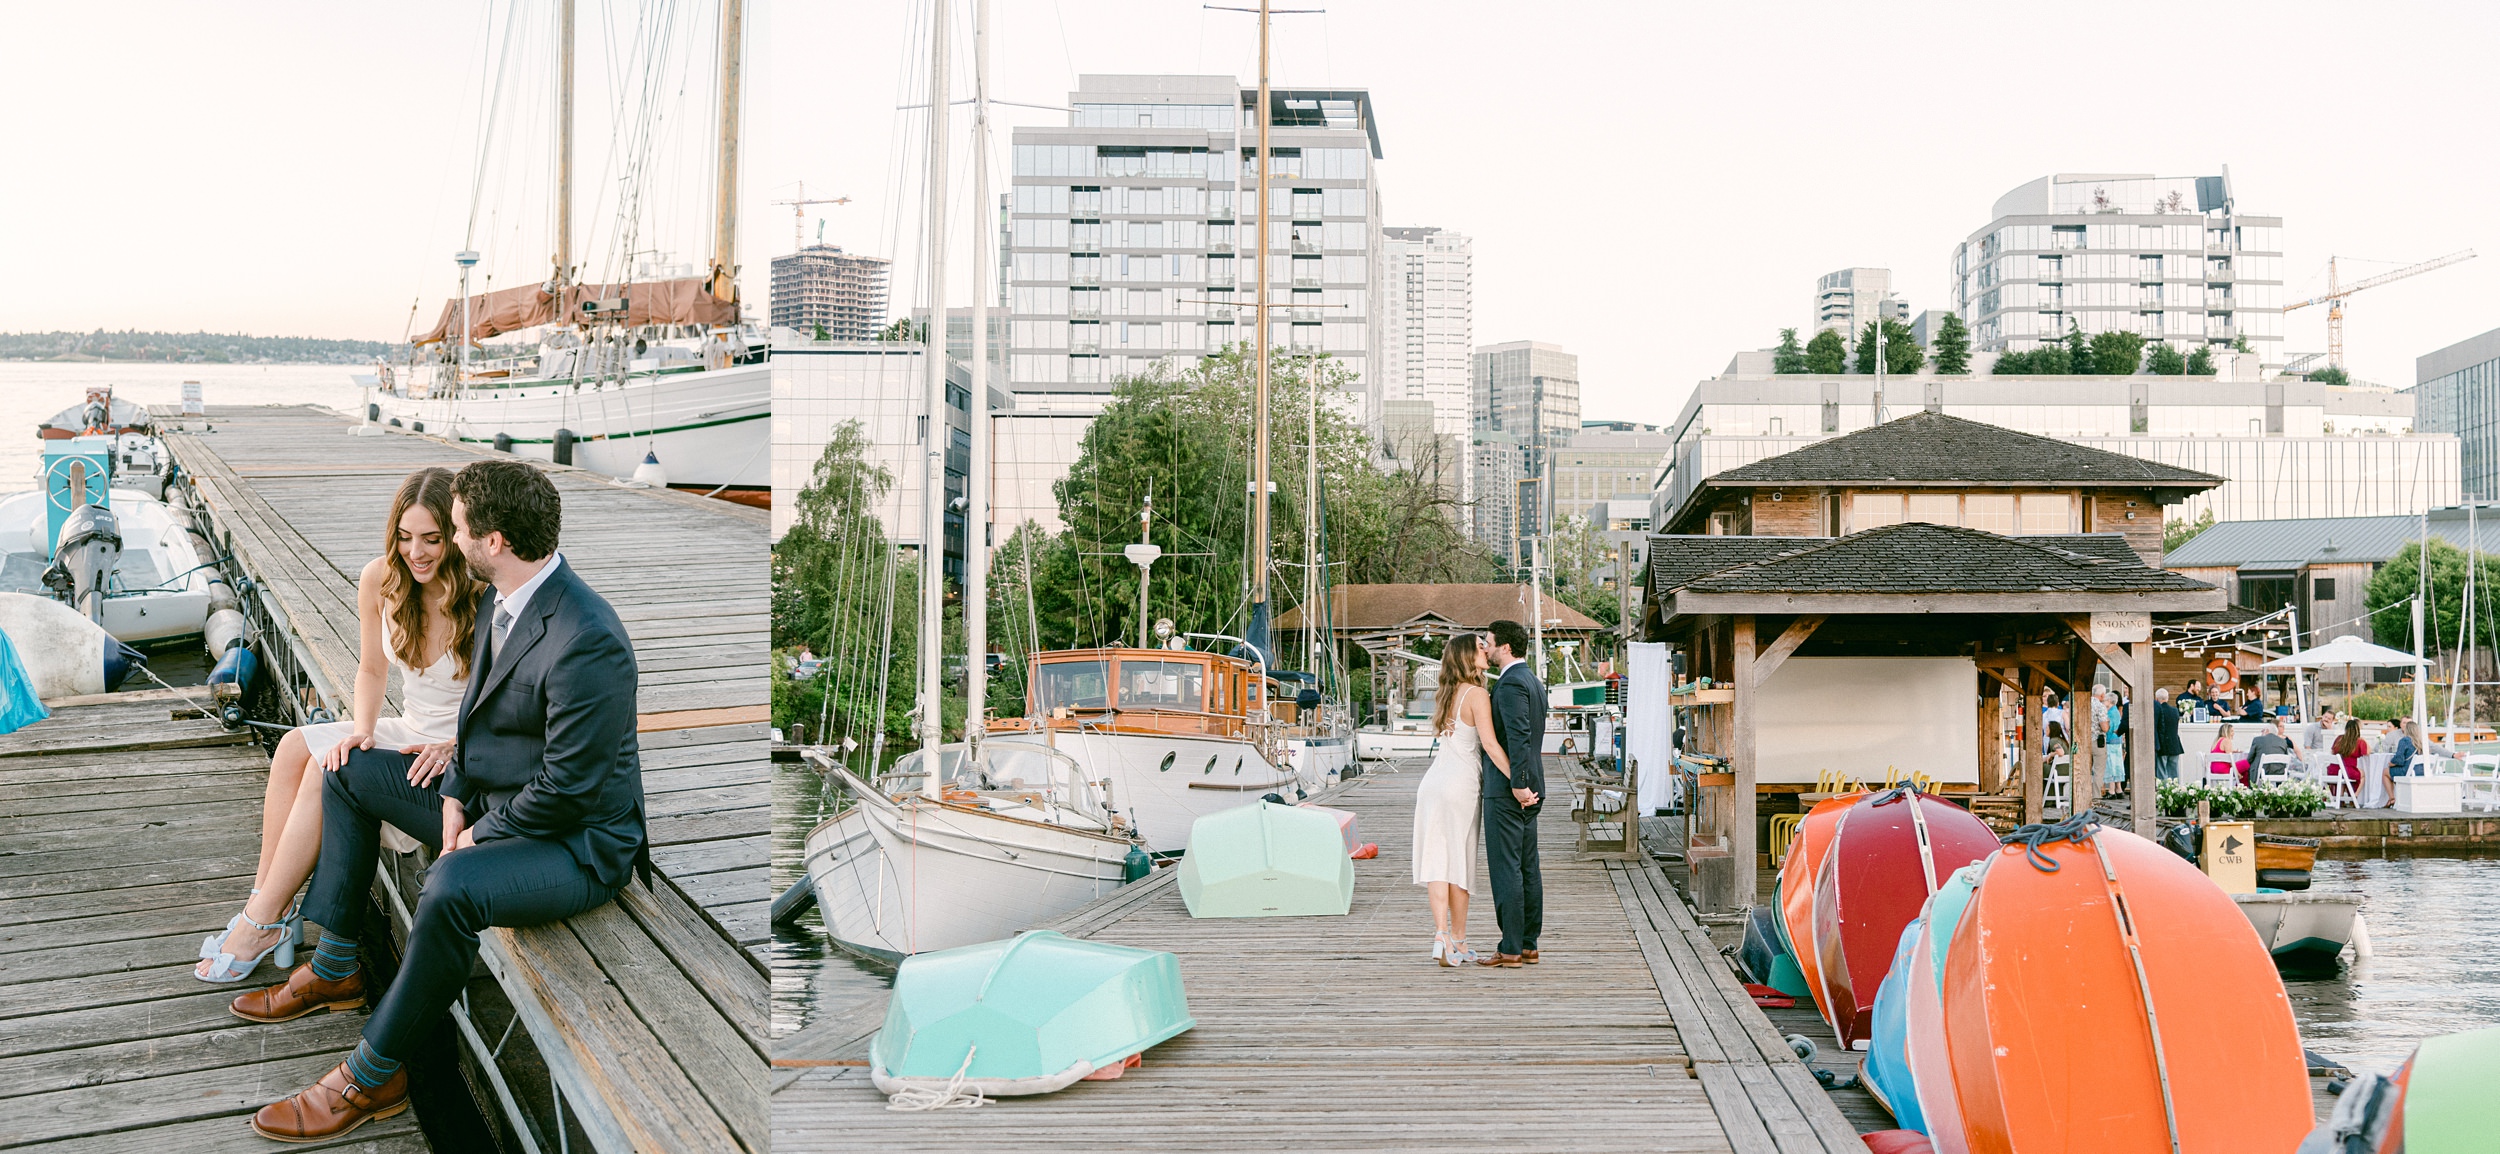 Fine Art Weddings in Seattle Washington. The Center for Wooden Boats, bride and groom at the end of the dock taking couples' portraits. The sun has set and the lighting is soft. They are smiling and have a post-wedding glow. Loeffler Randall Shoes make another appearance. The cityscape is in the background along with the wedding venue.